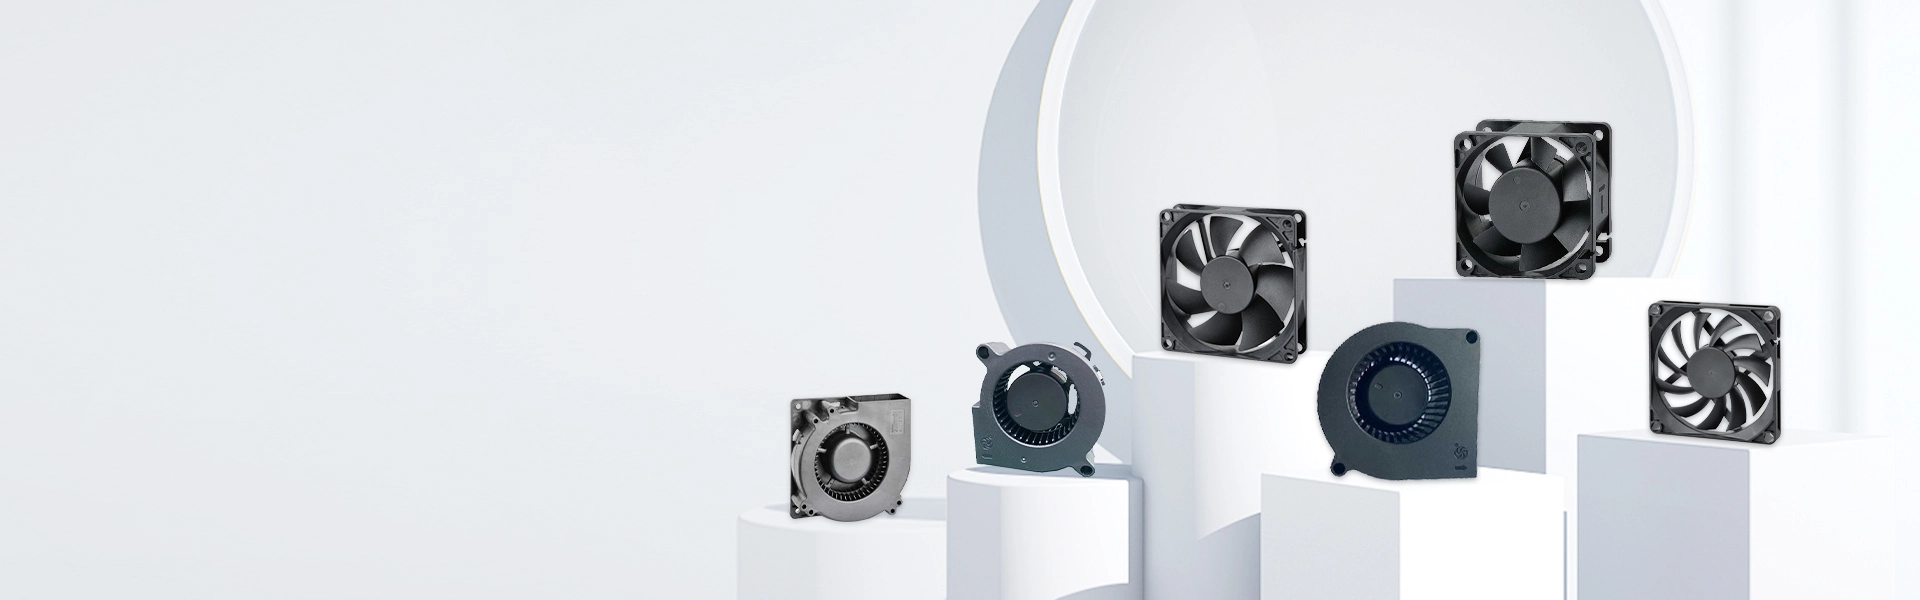 Industrial Axial Cooling Fans